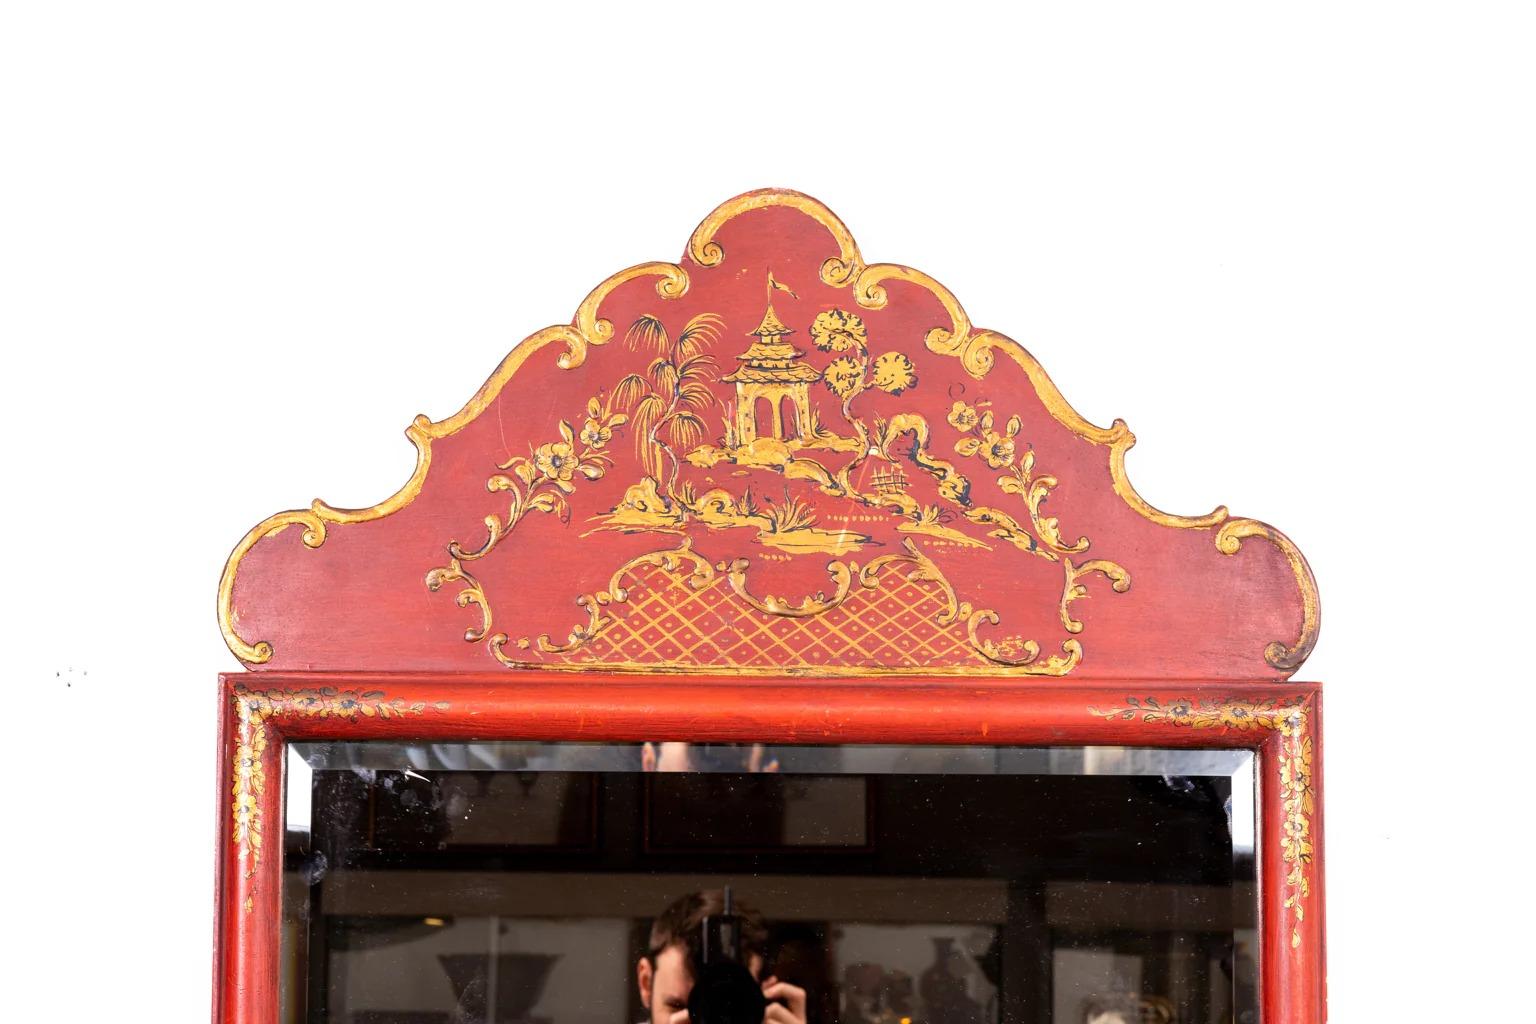 Queen Anne Style Japanned Mirror with chinoiserie decoration. Please note of wear consistent with age.